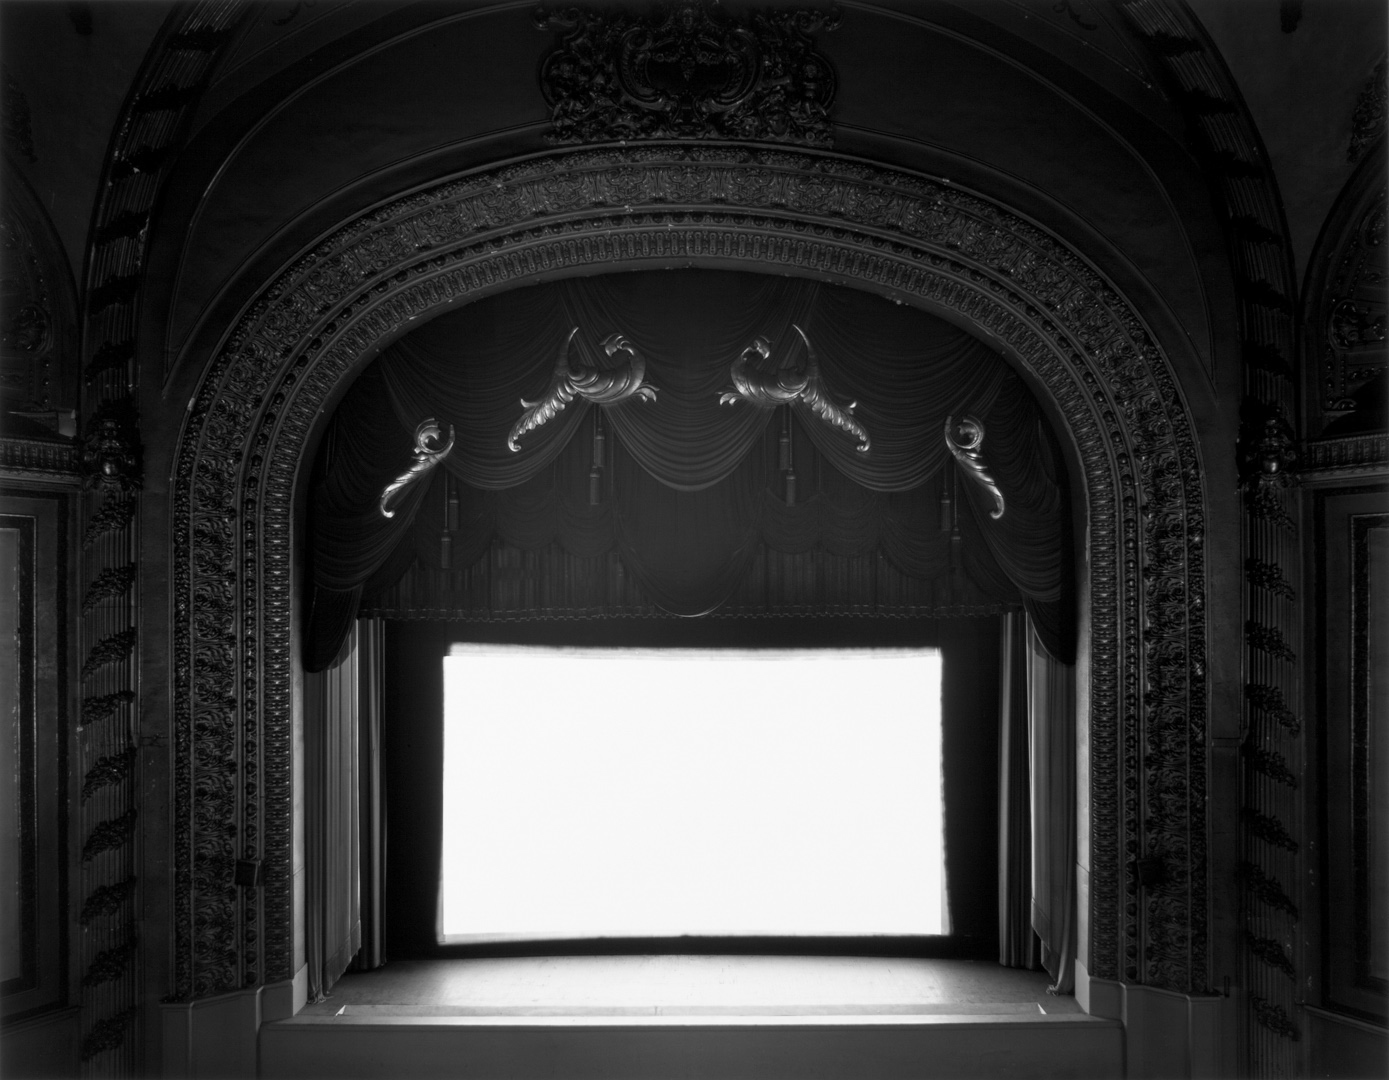 A black and white photograph of an ornately decorated classic movie theater with a bright white screen